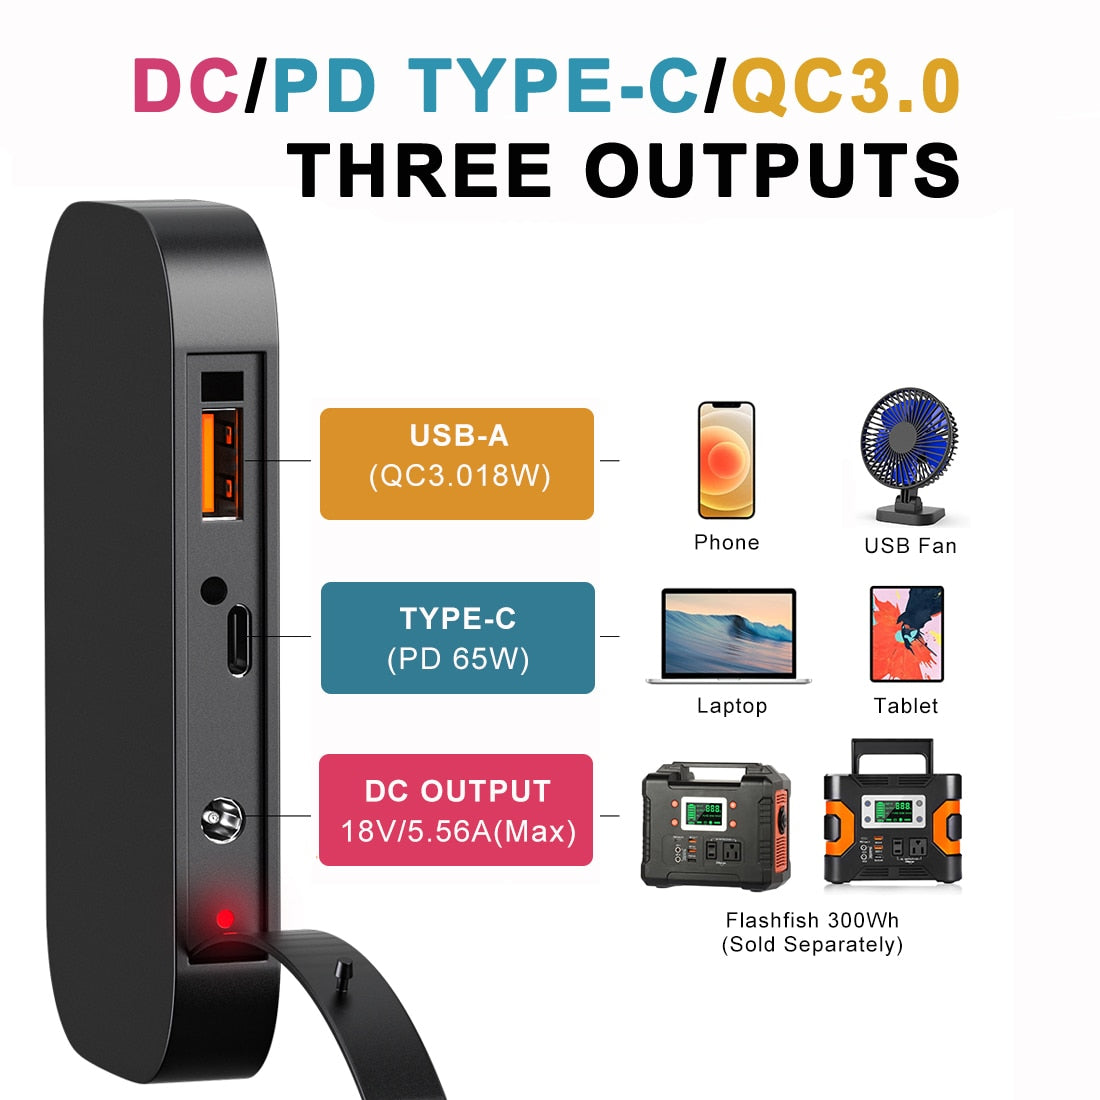 DCIPD TYPE-C/Qc3.0 T